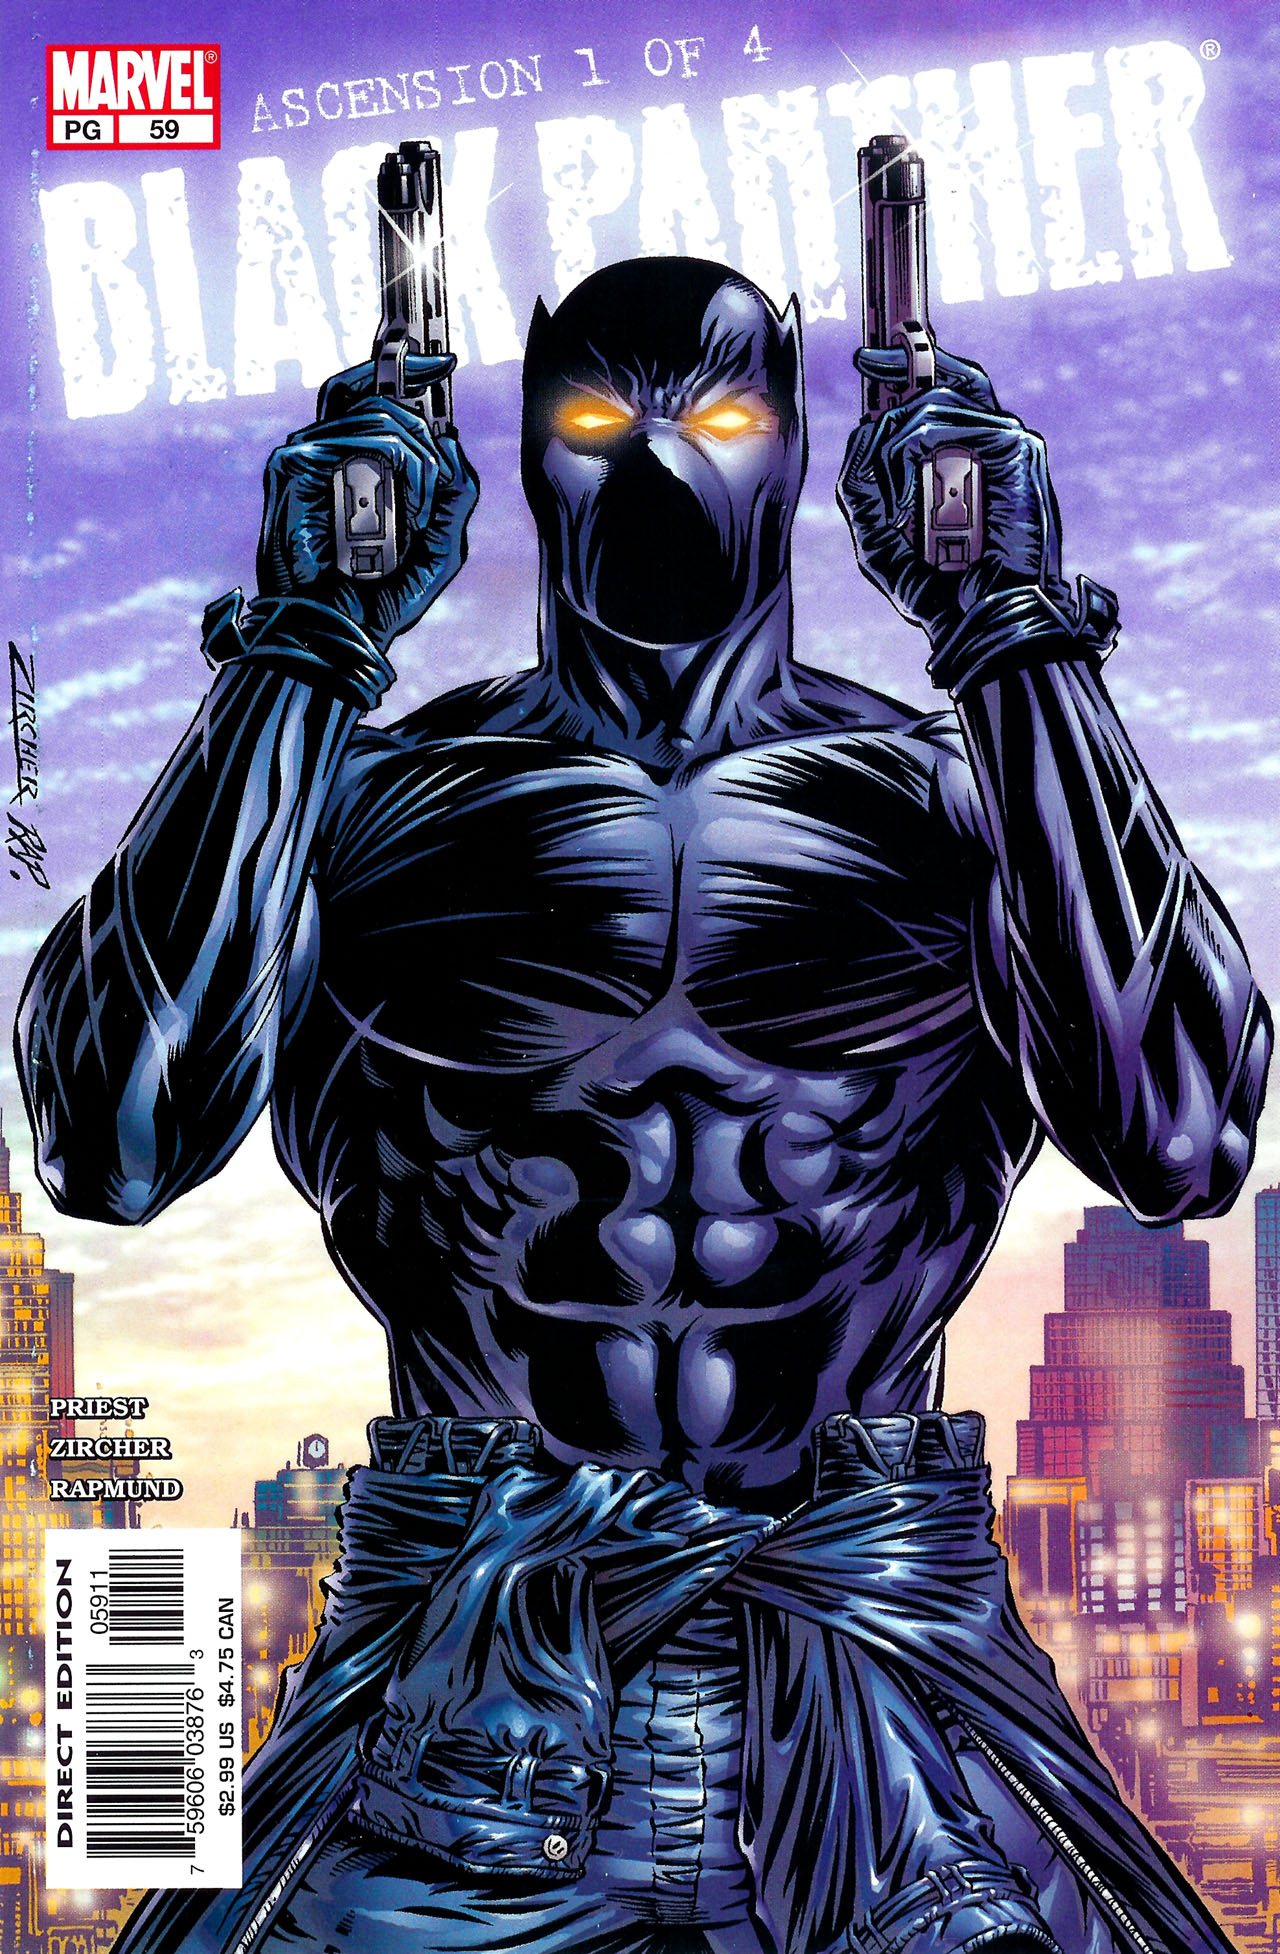 Read online Black Panther (1998) comic -  Issue #59 - 1